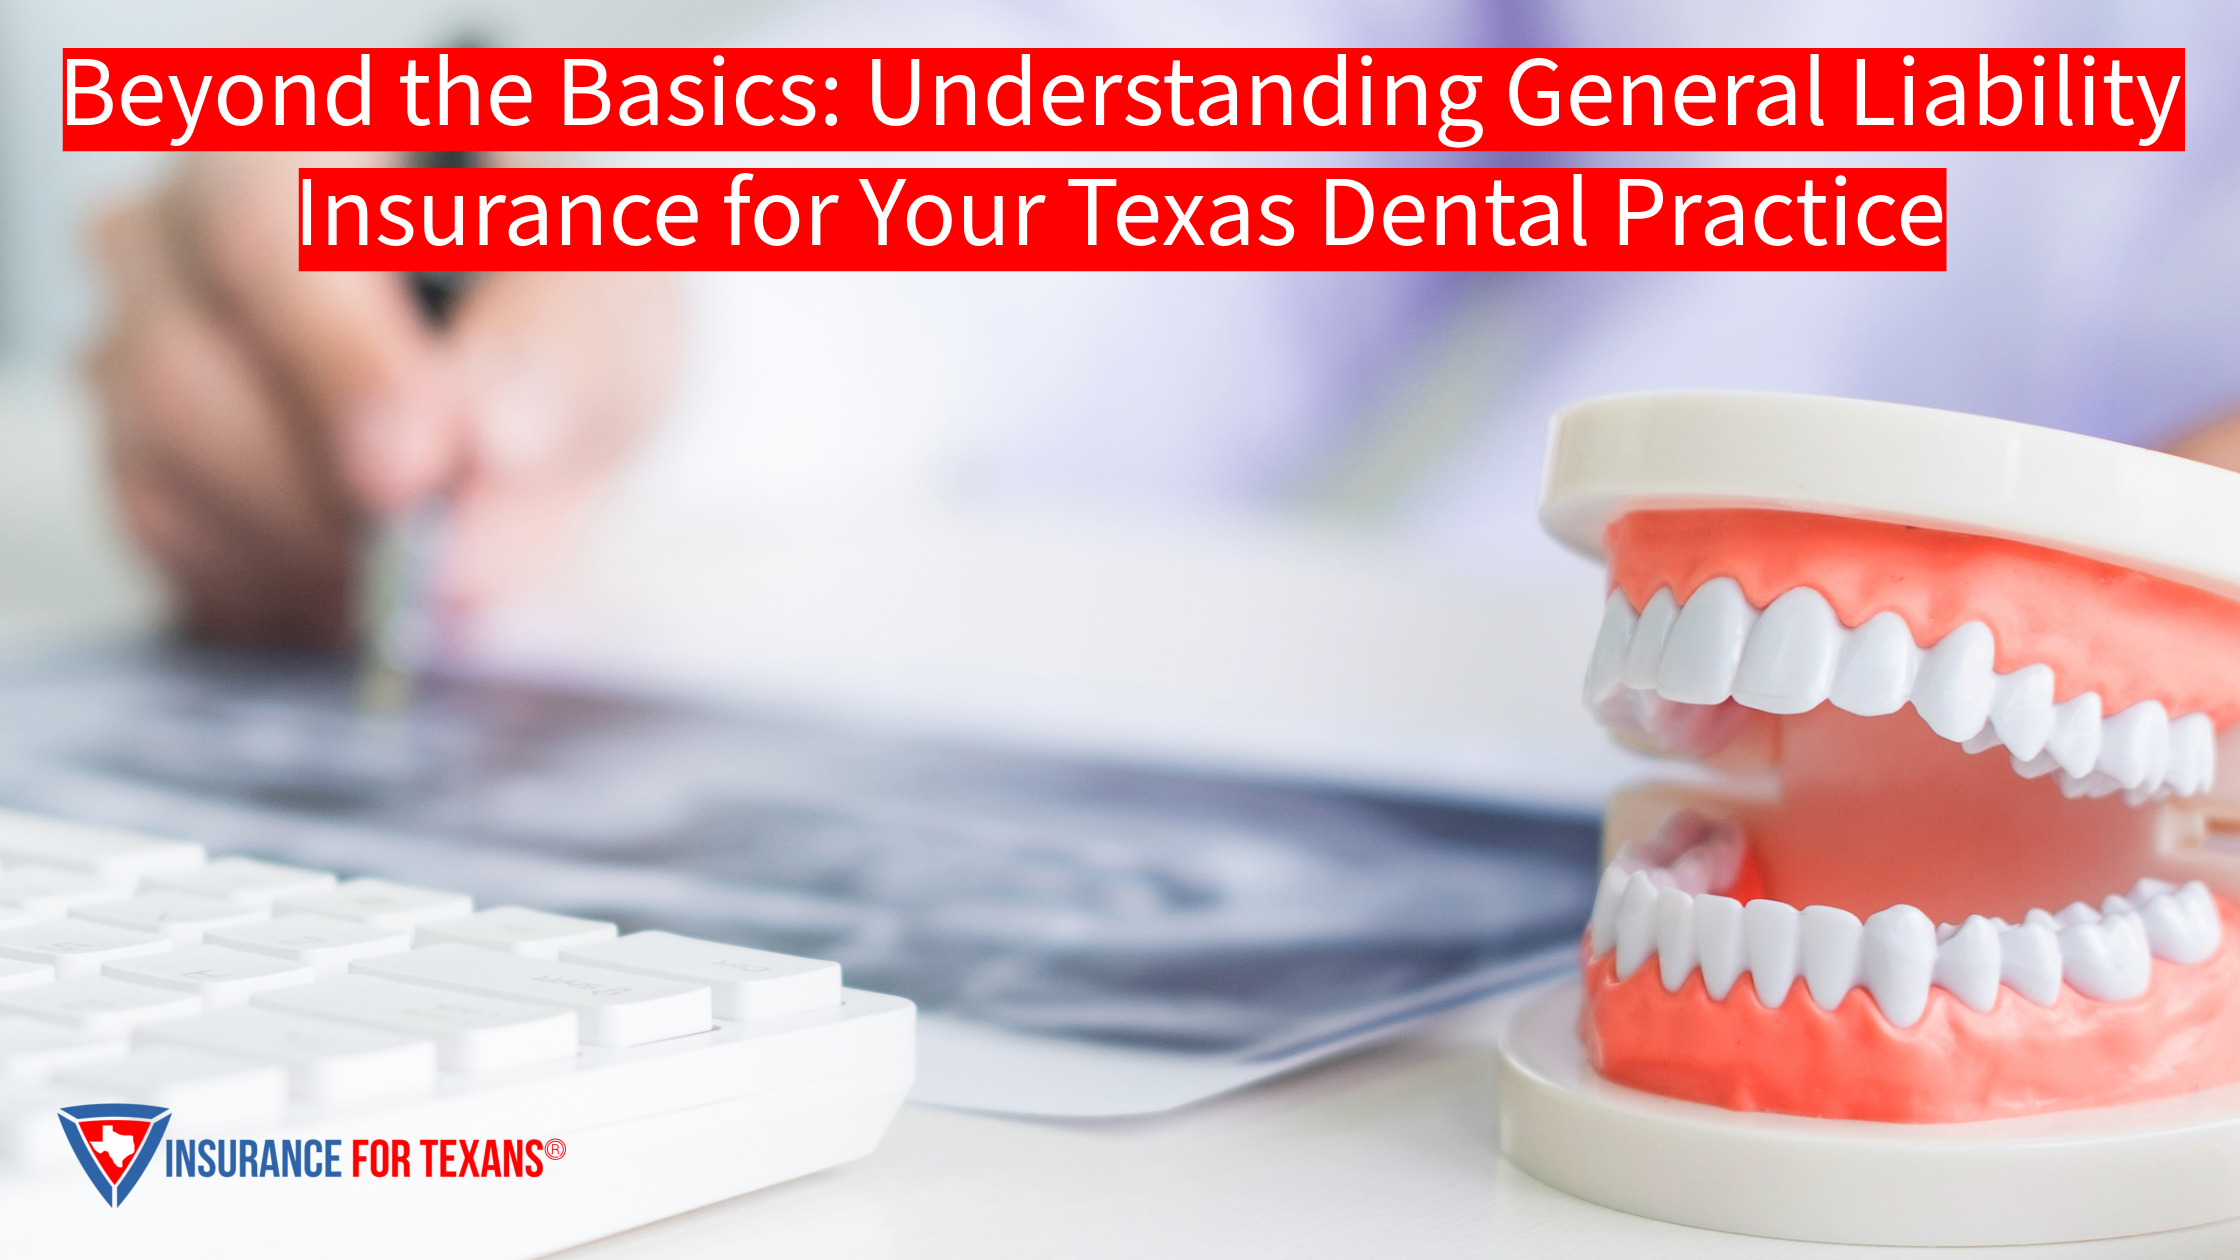 Beyond the Basics: Understanding General Liability Insurance for Your Texas Dental Practice